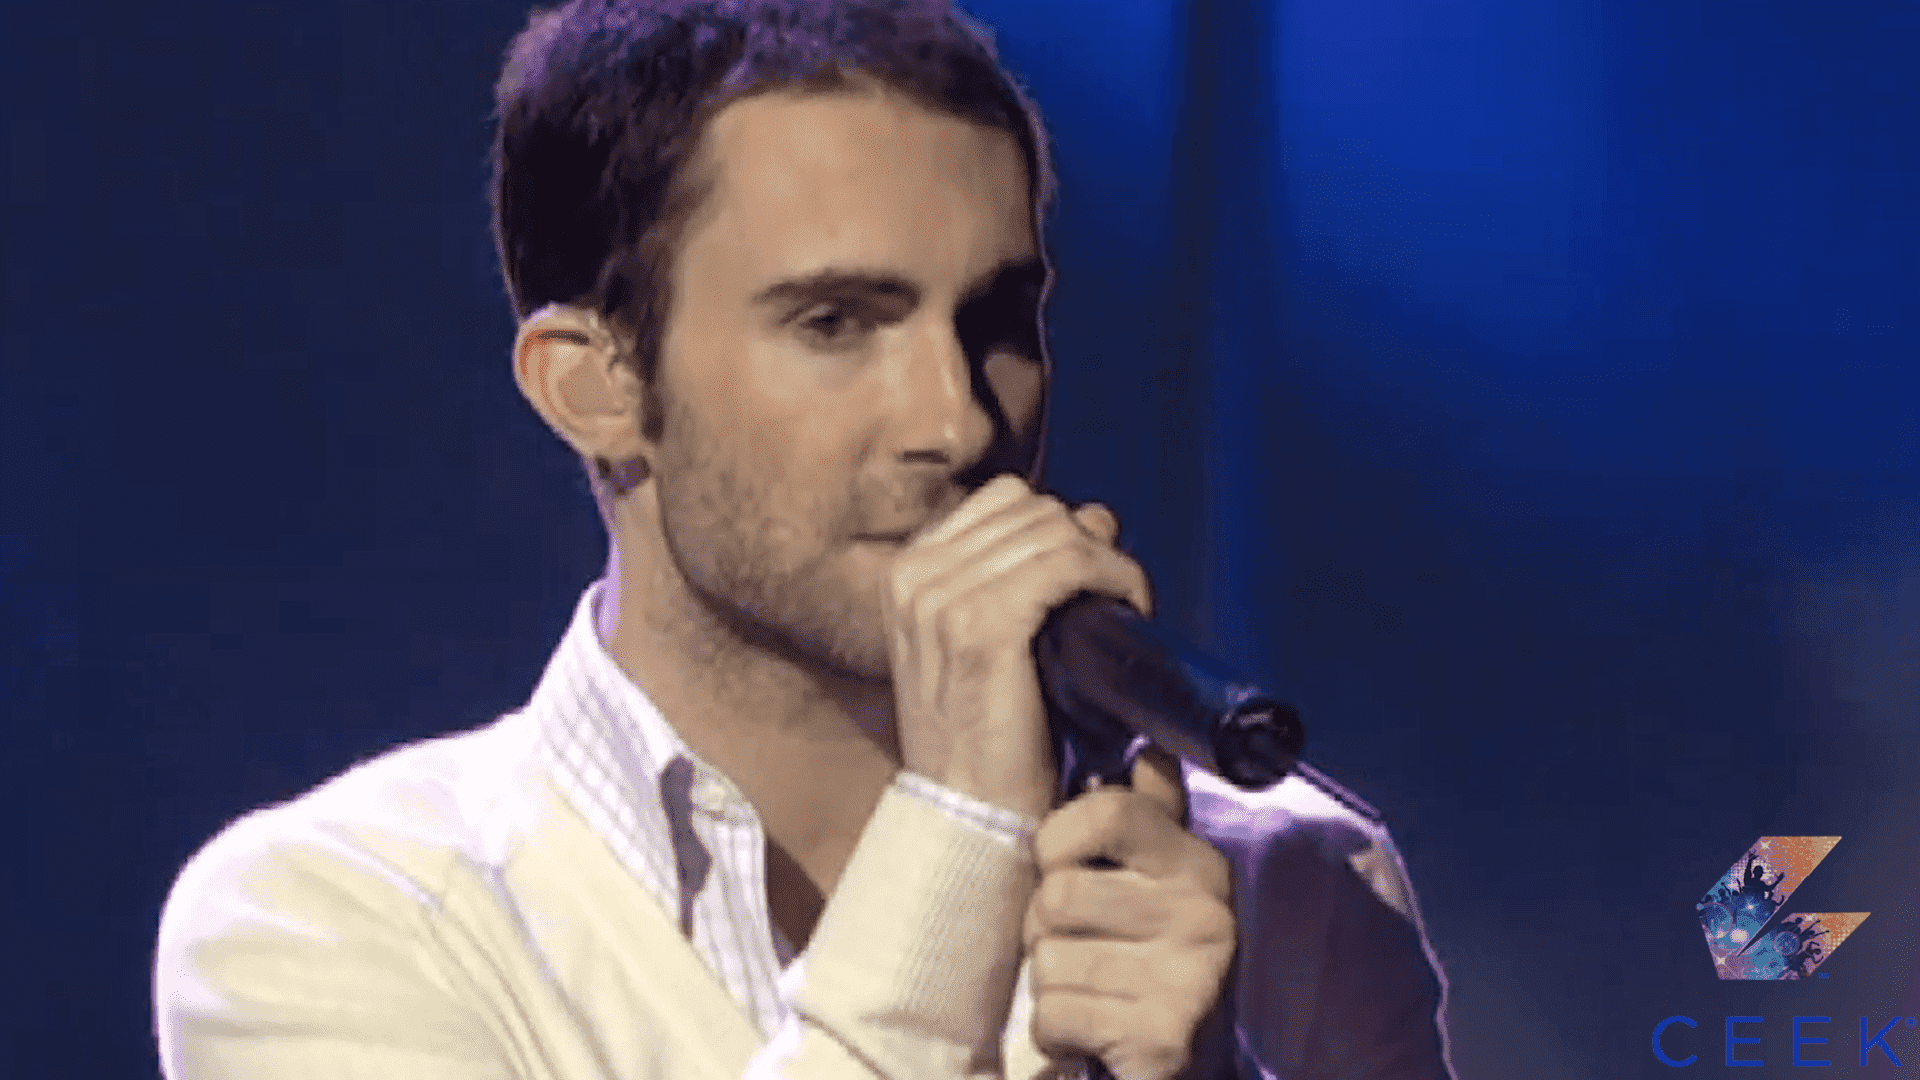 World Music Awards, Maroon 5 Maroon 5 Perform She Will Be Loved at the World Music Awards